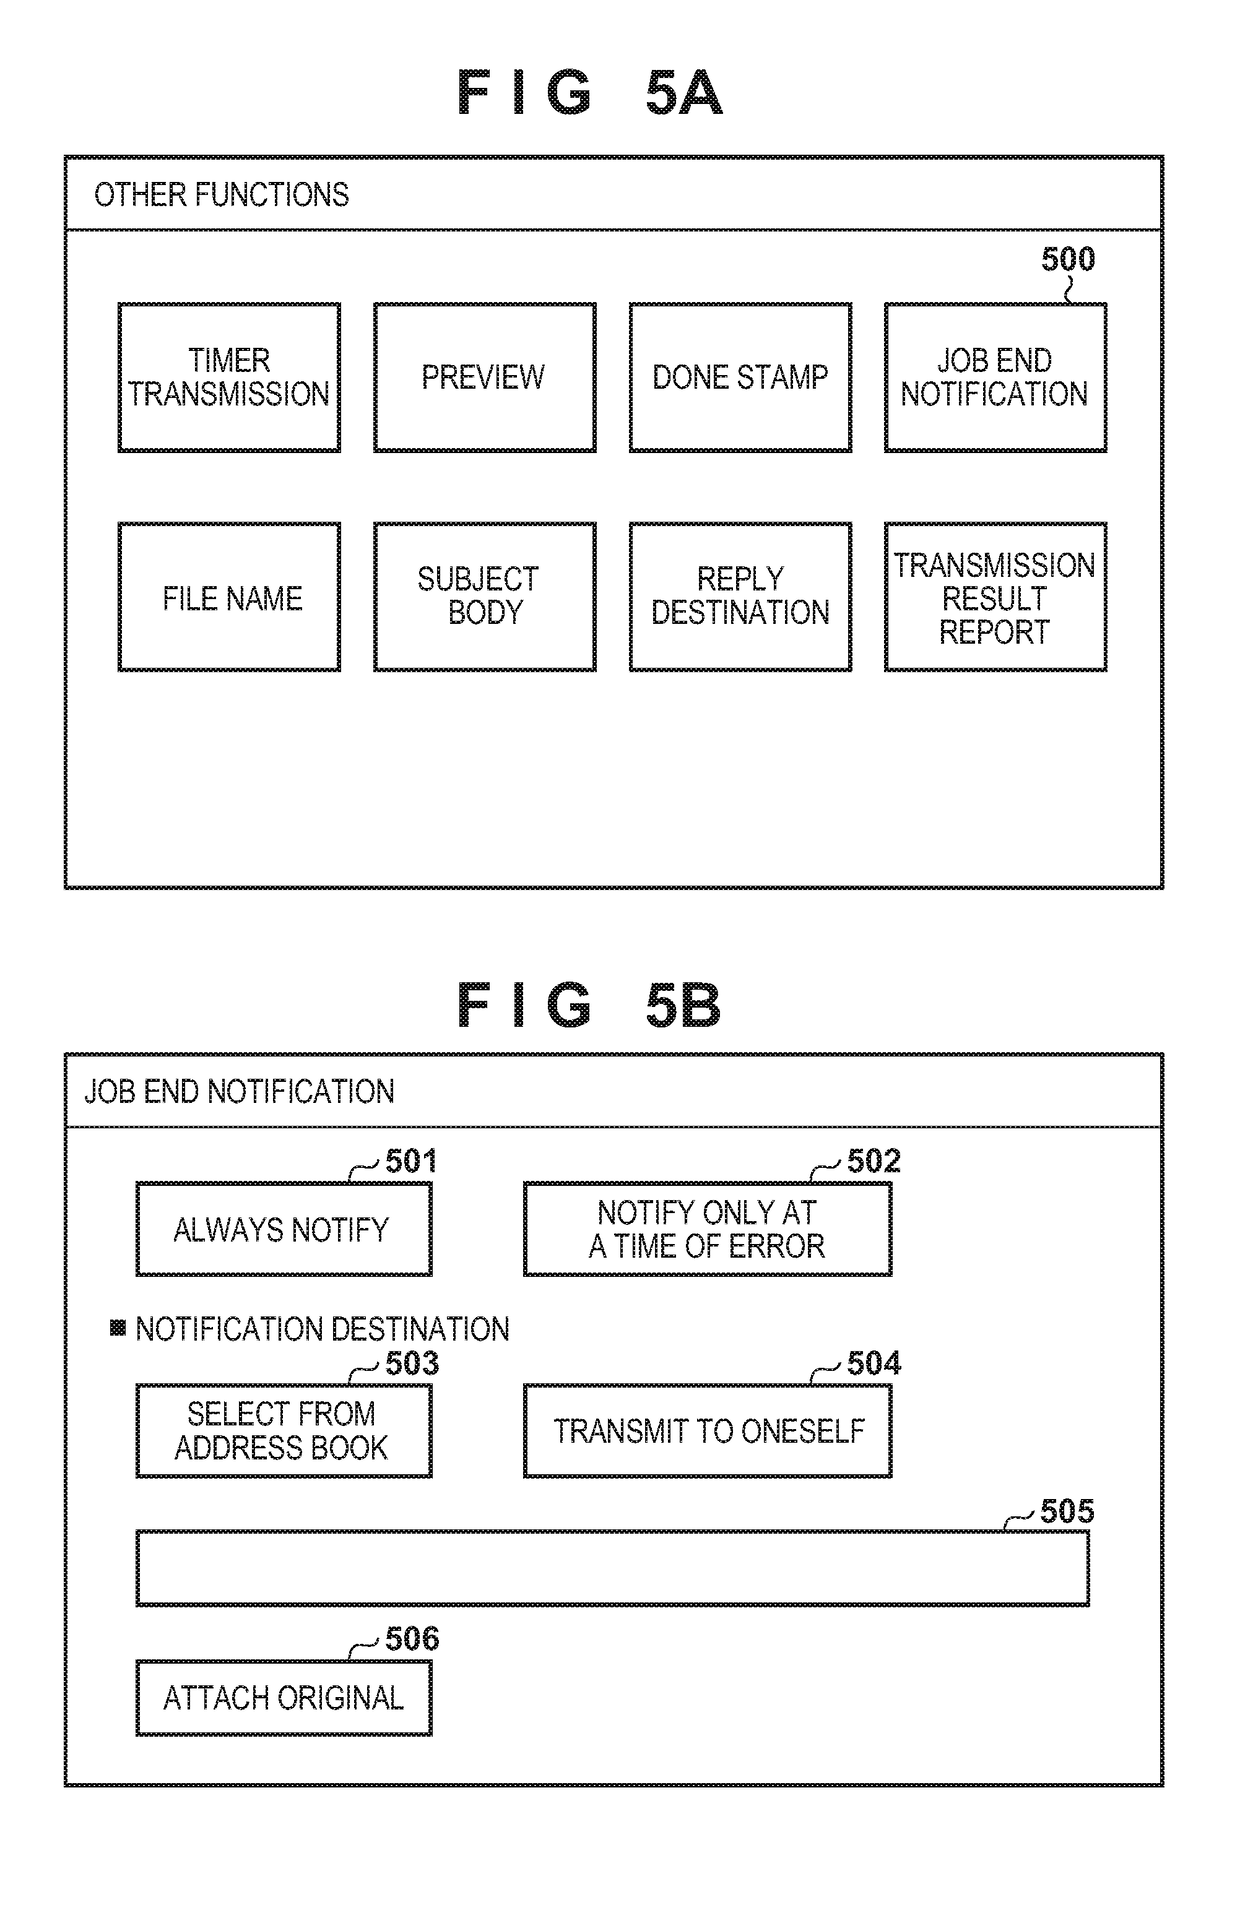 Image processing apparatus, method of controlling the same, and storage medium